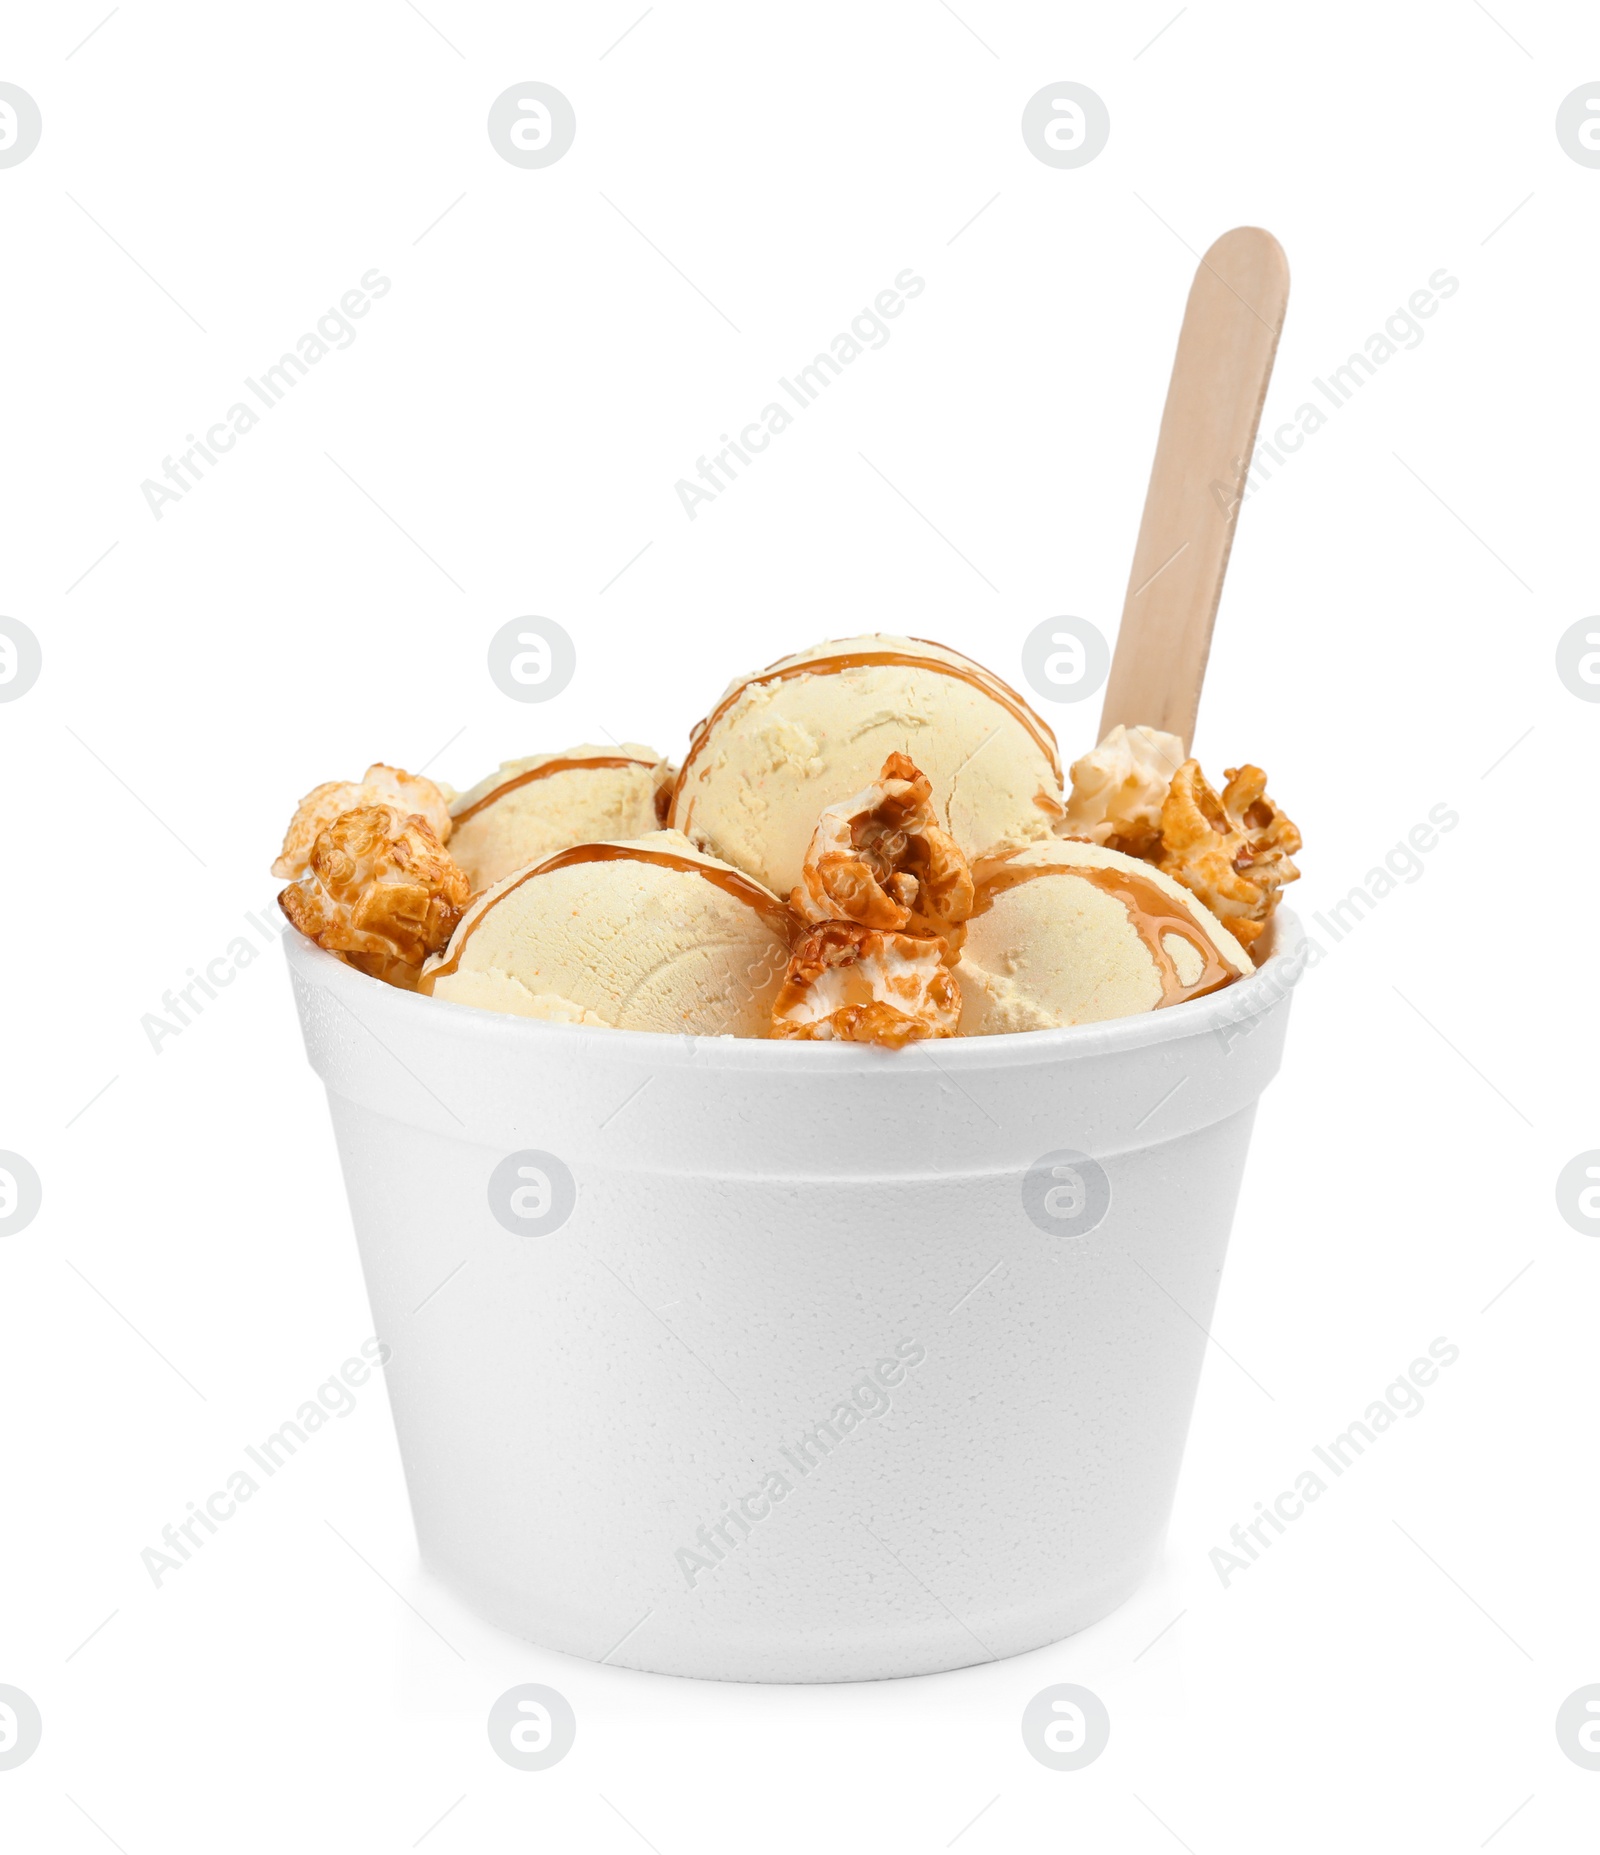 Photo of Delicious ice cream with caramel popcorn and sauce in dessert bowl on white background